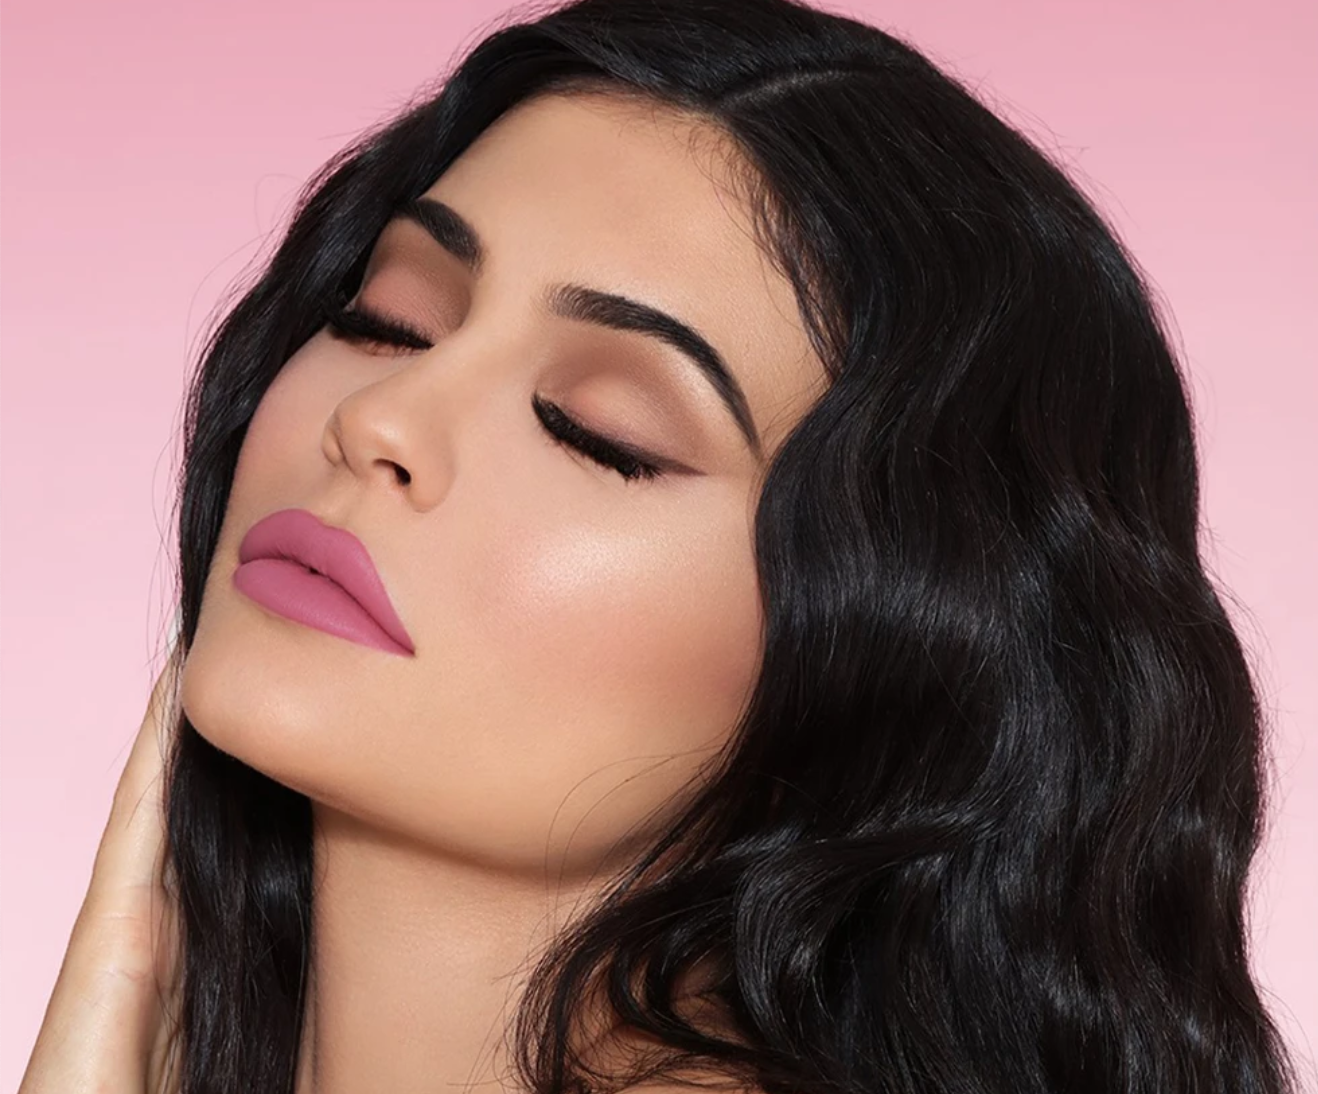 Kylie Jenner poses in an advertisement for Kylie Cosmetics.